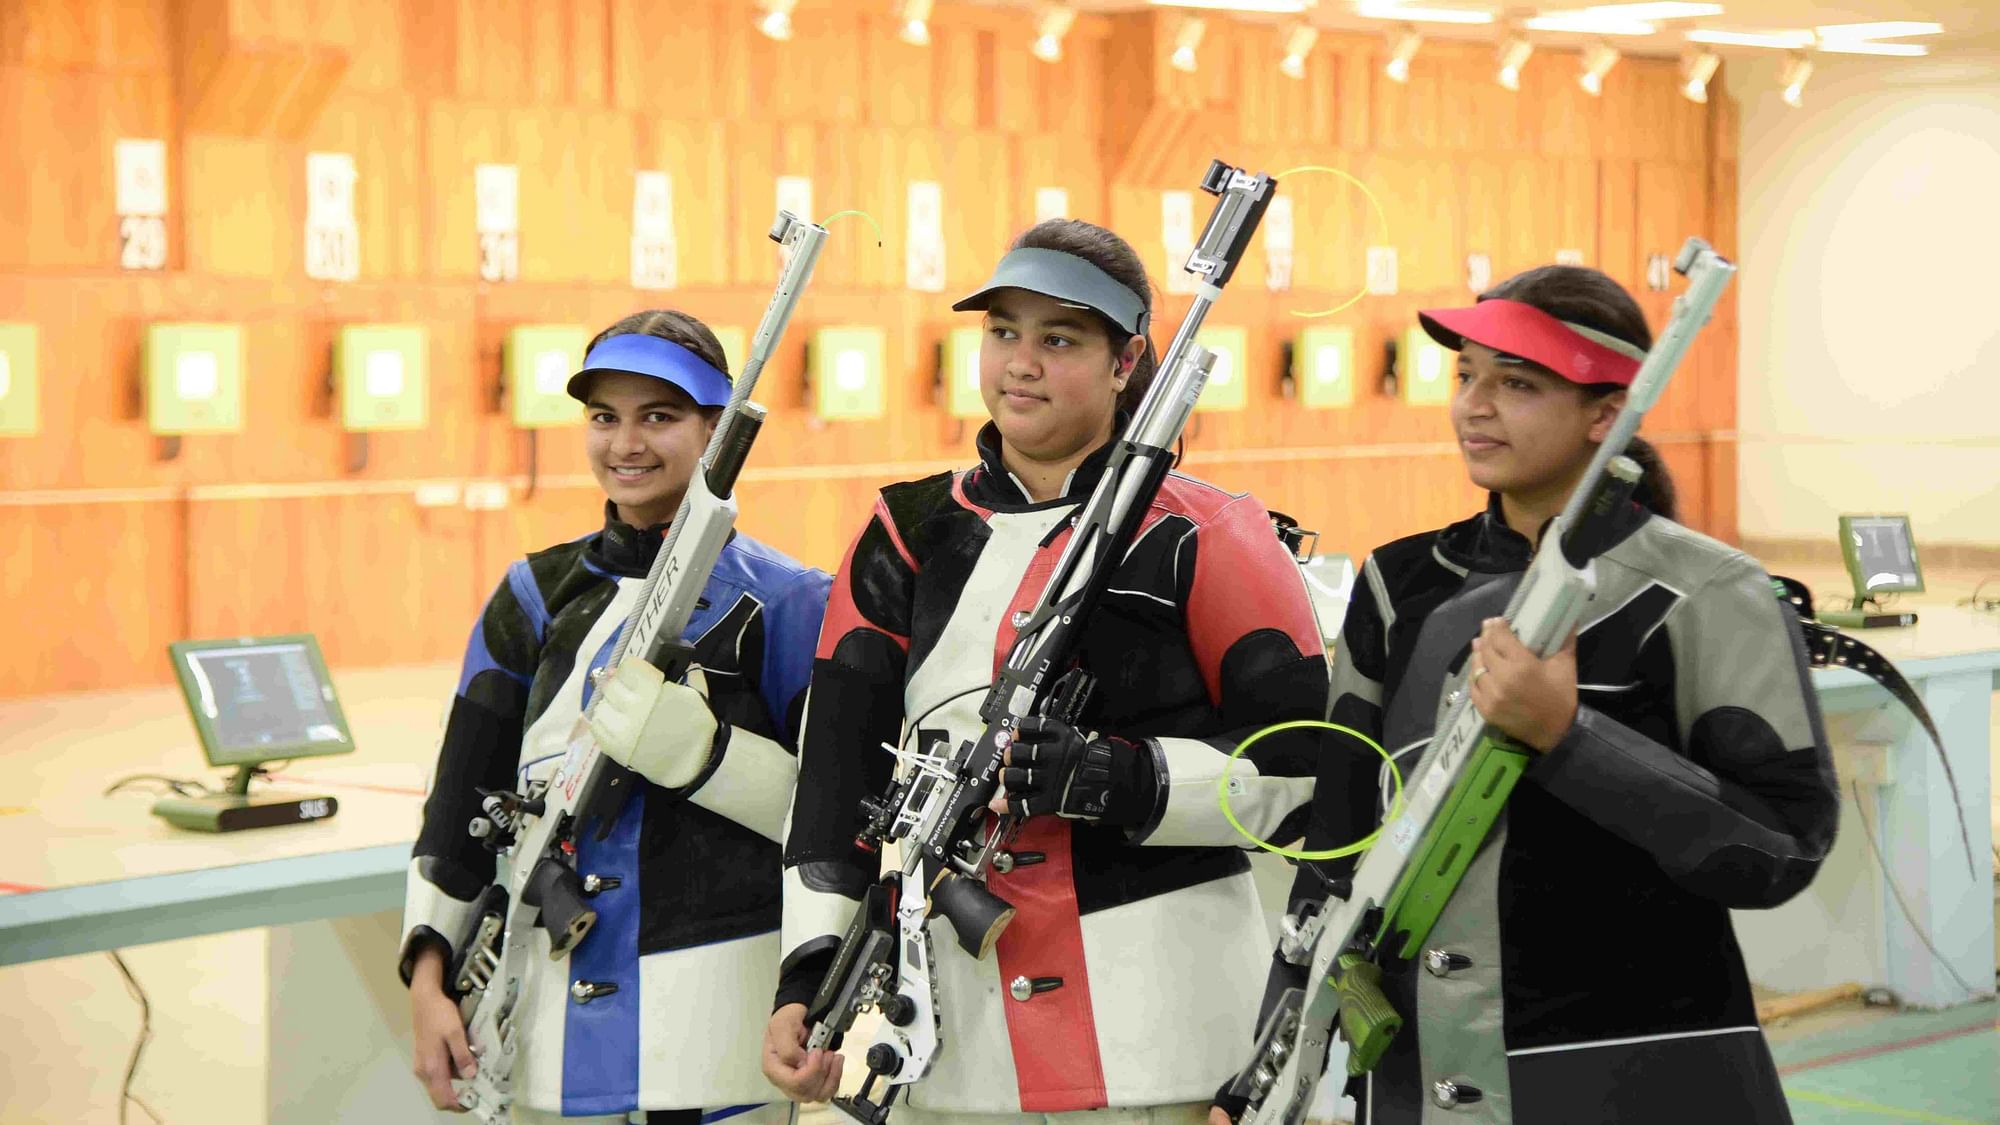 Zeena Khitta (centre) shot 251.3 to bag gold in the 10m Air Rifle category at the Khelo India Youth Games on Tuesday.